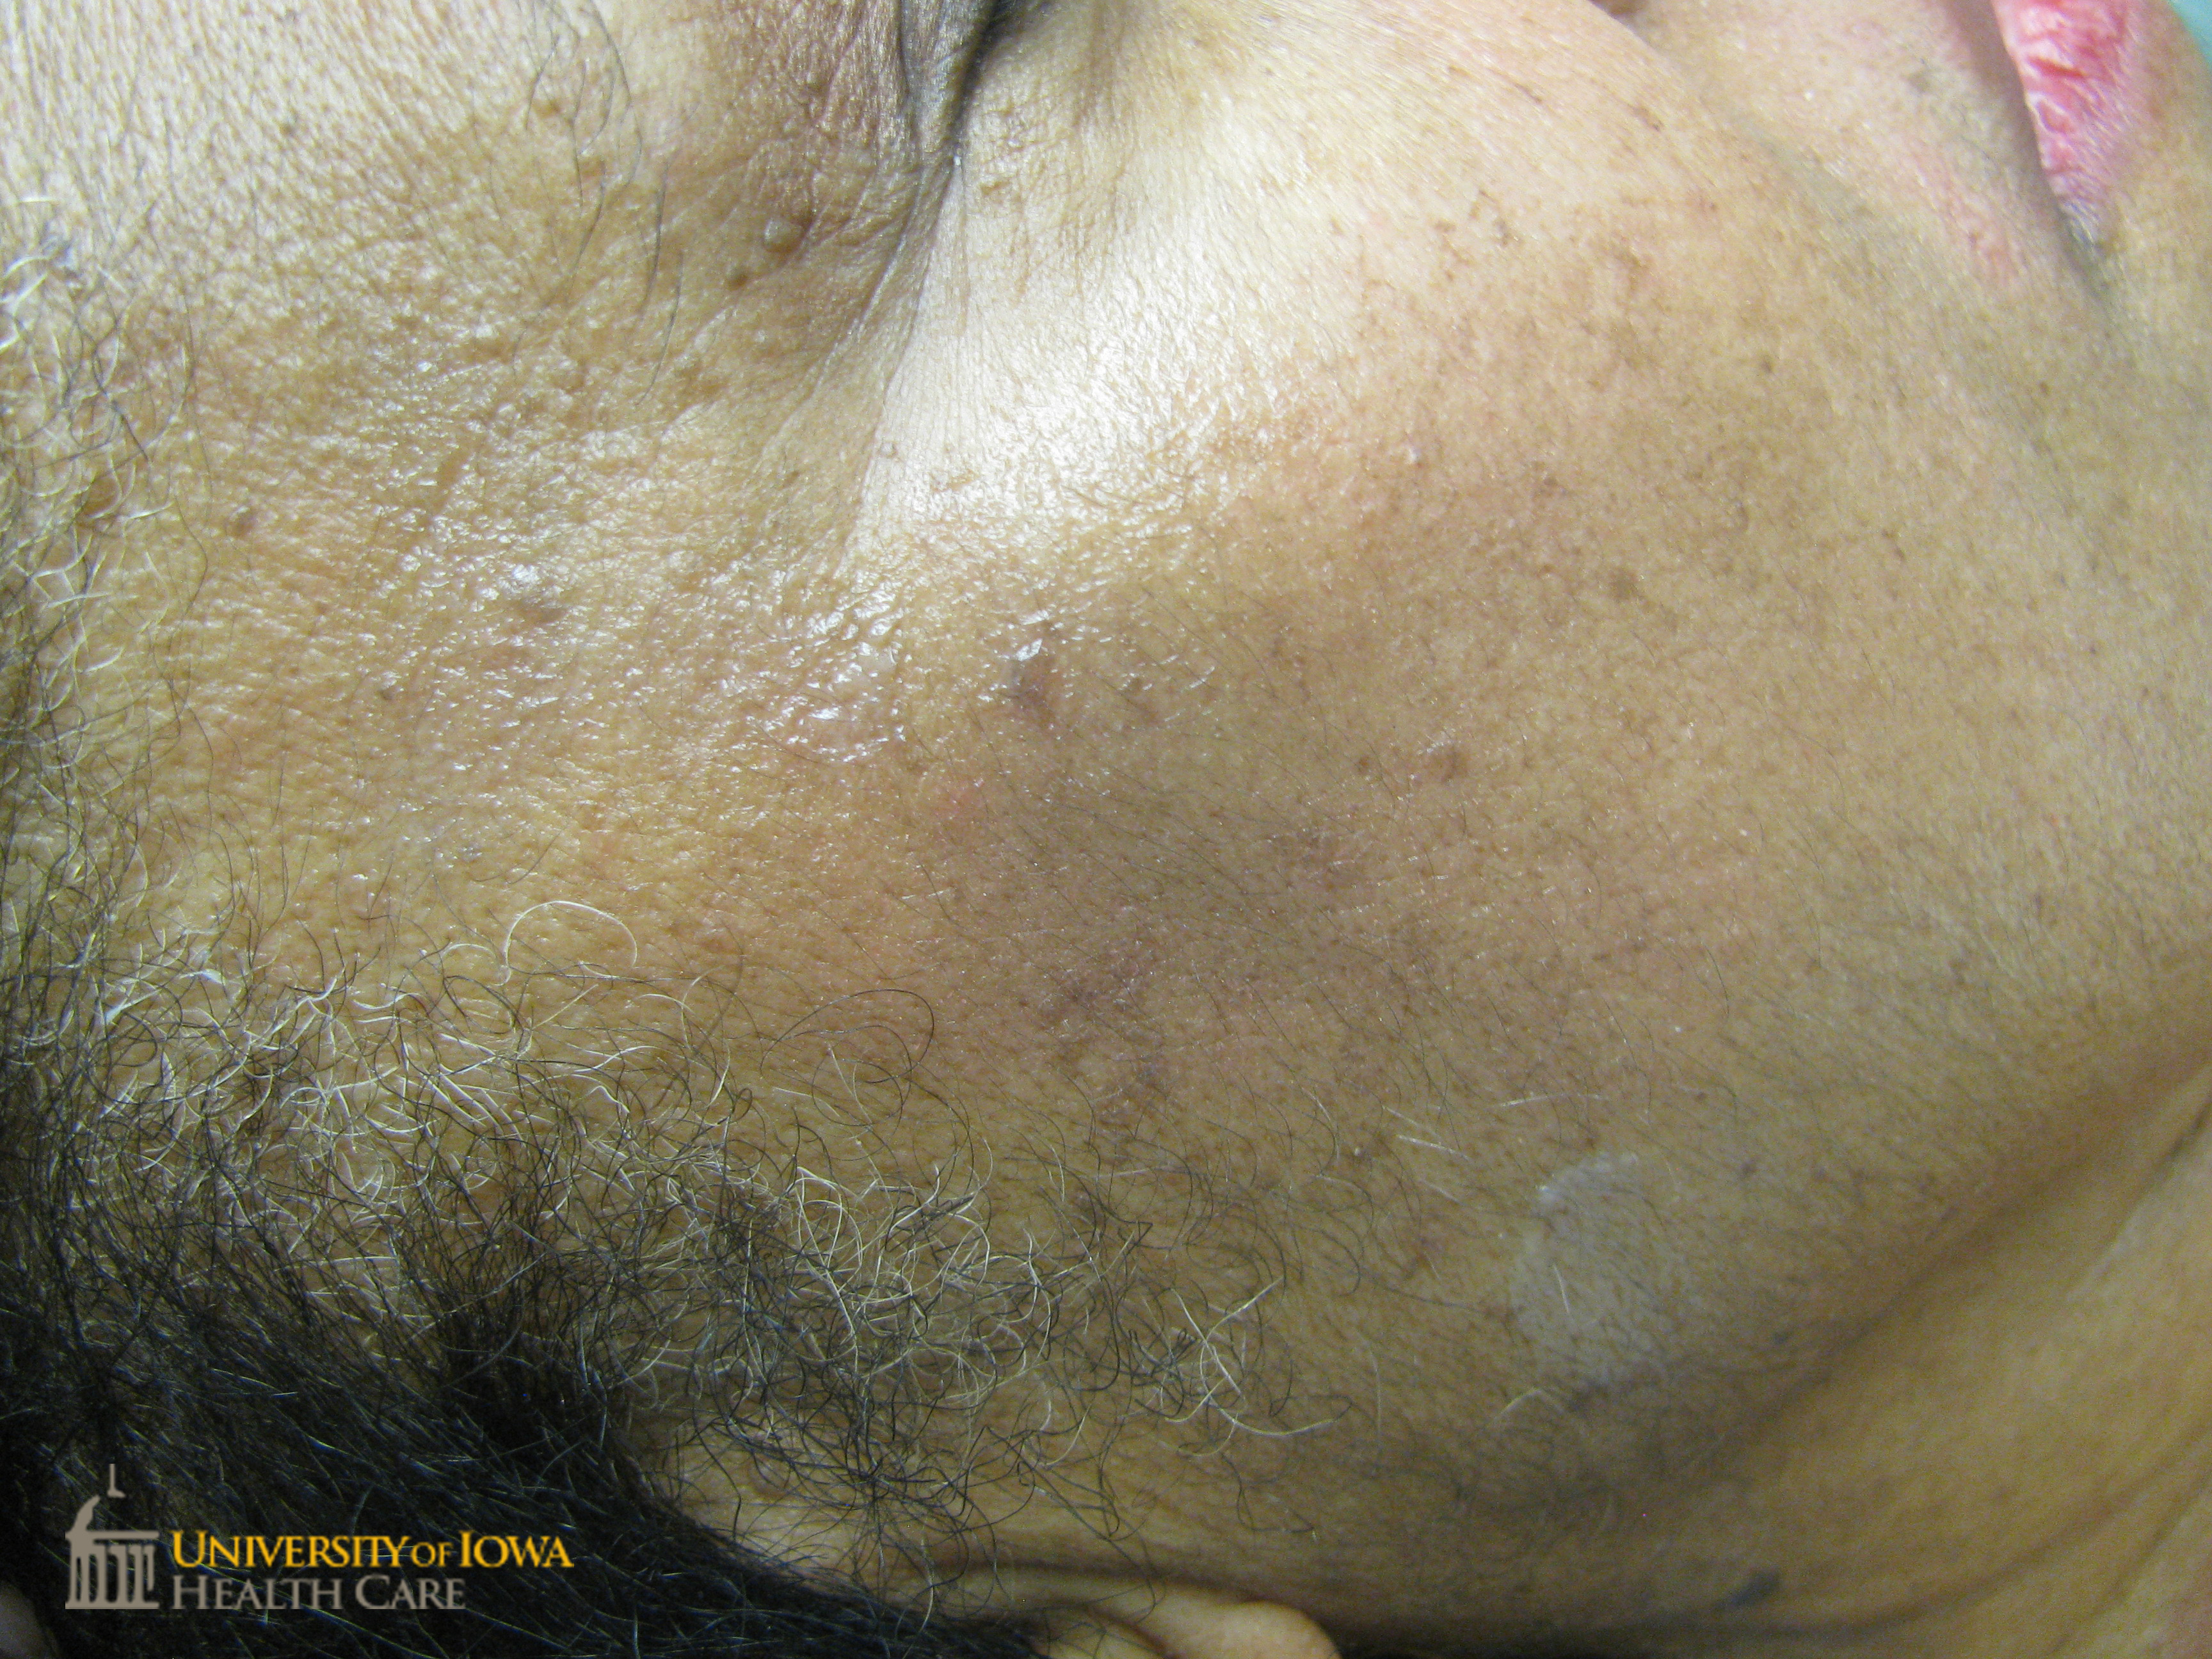 Multiple brown papules on the face. (click images for higher resolution).